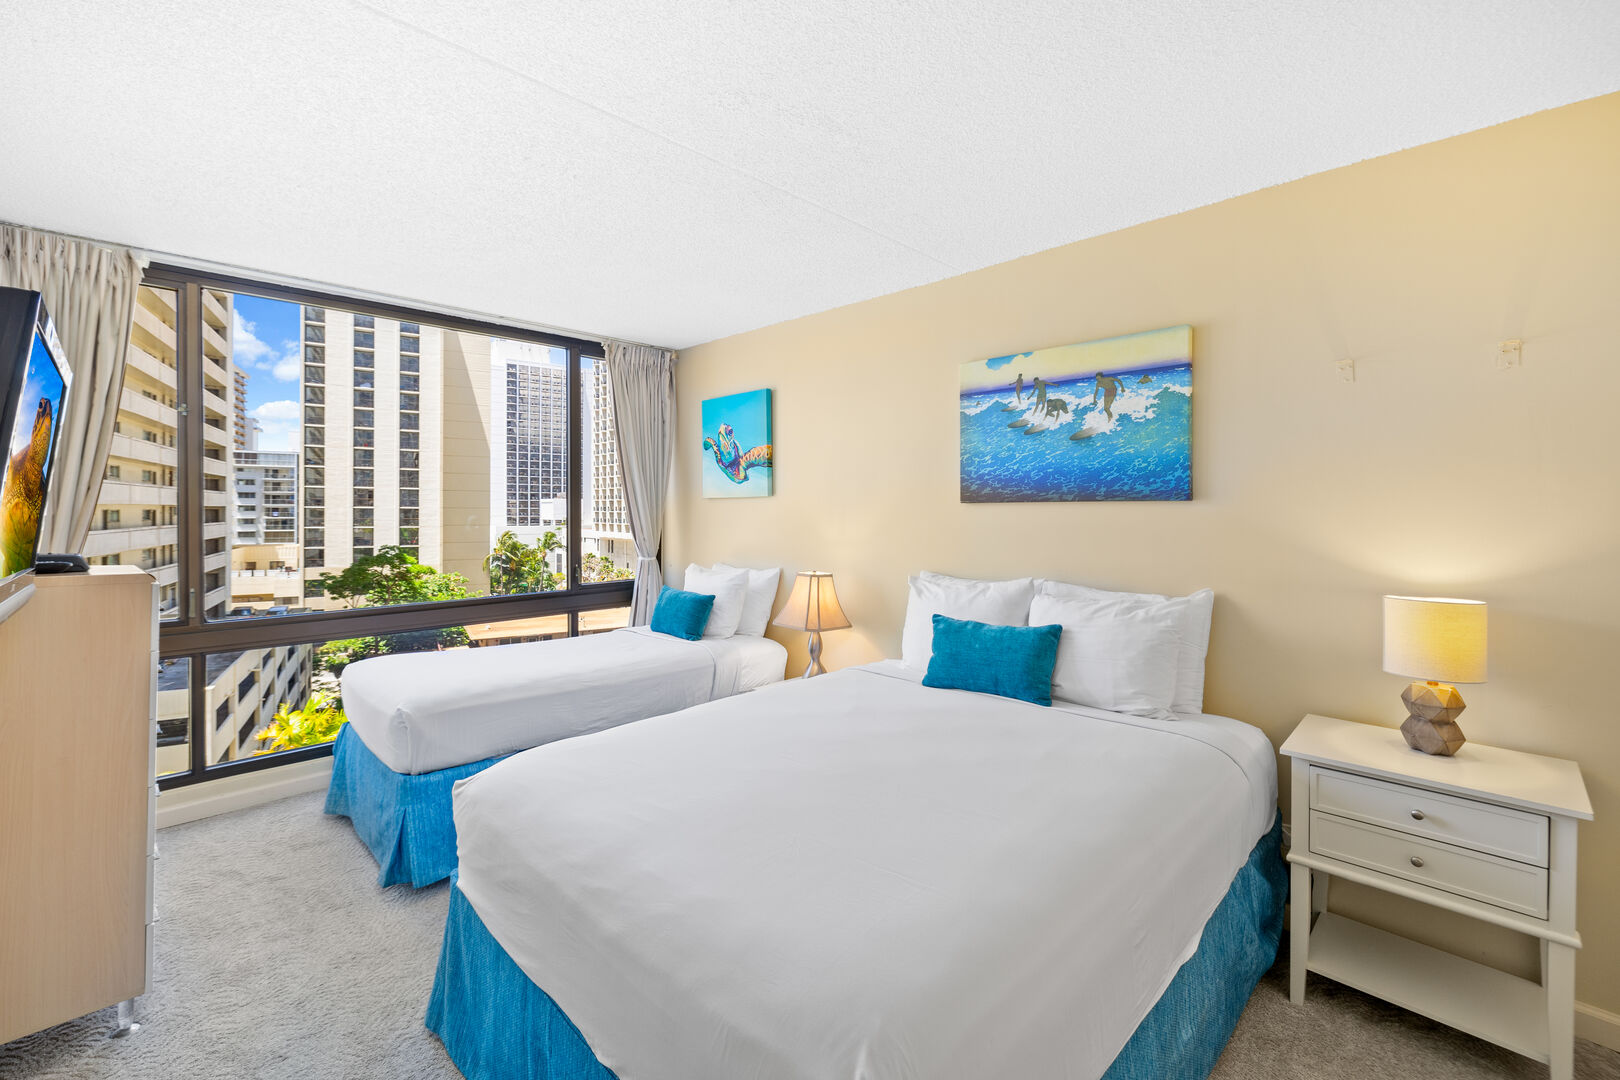 Relax in your bedroom with queen-size bed and twin-size bed, central AC, and TV!